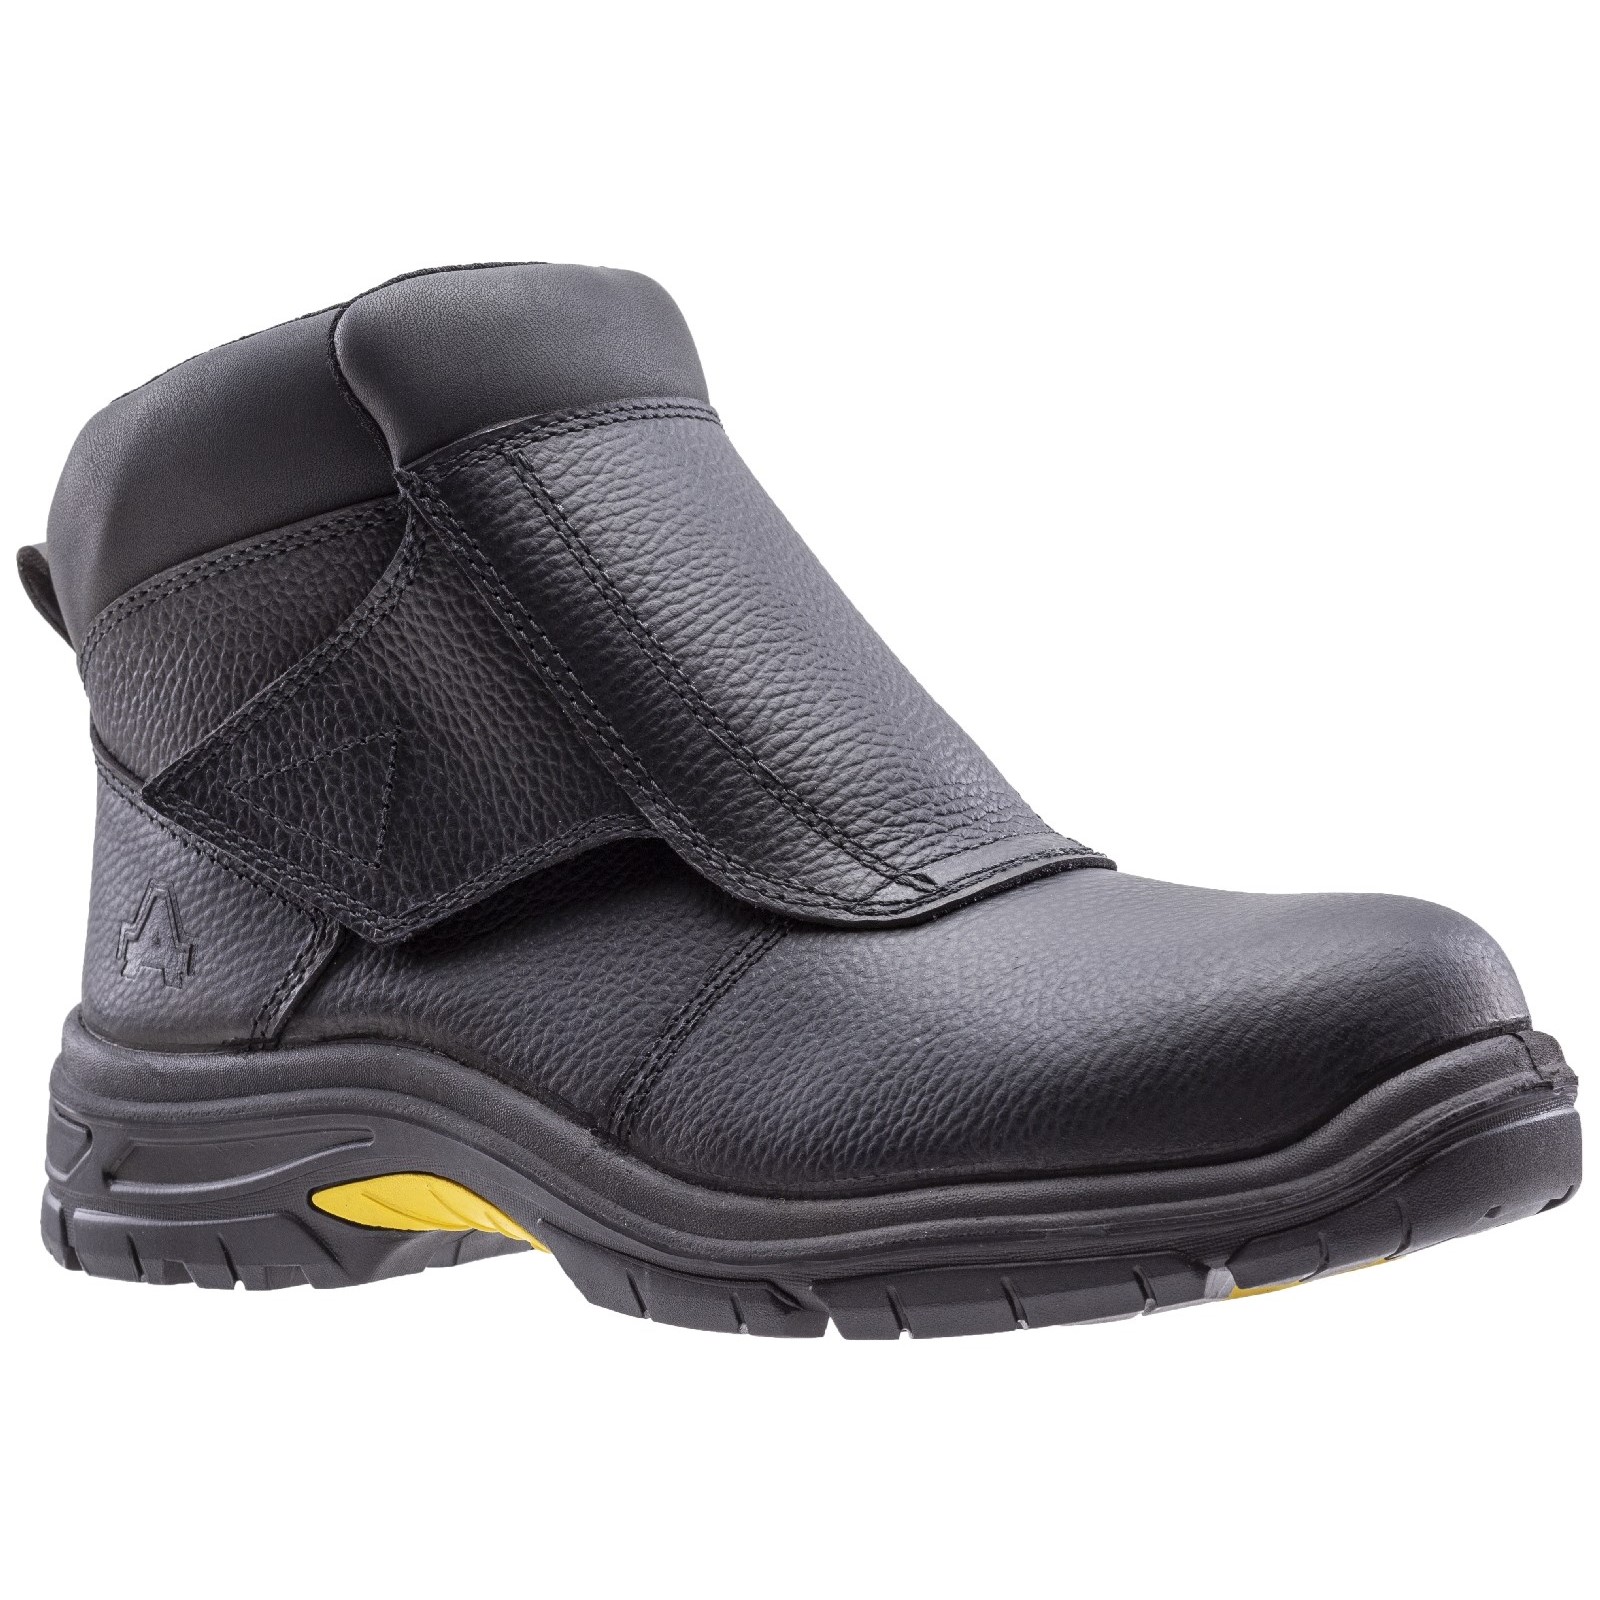 AS950 Welding Safety Boot